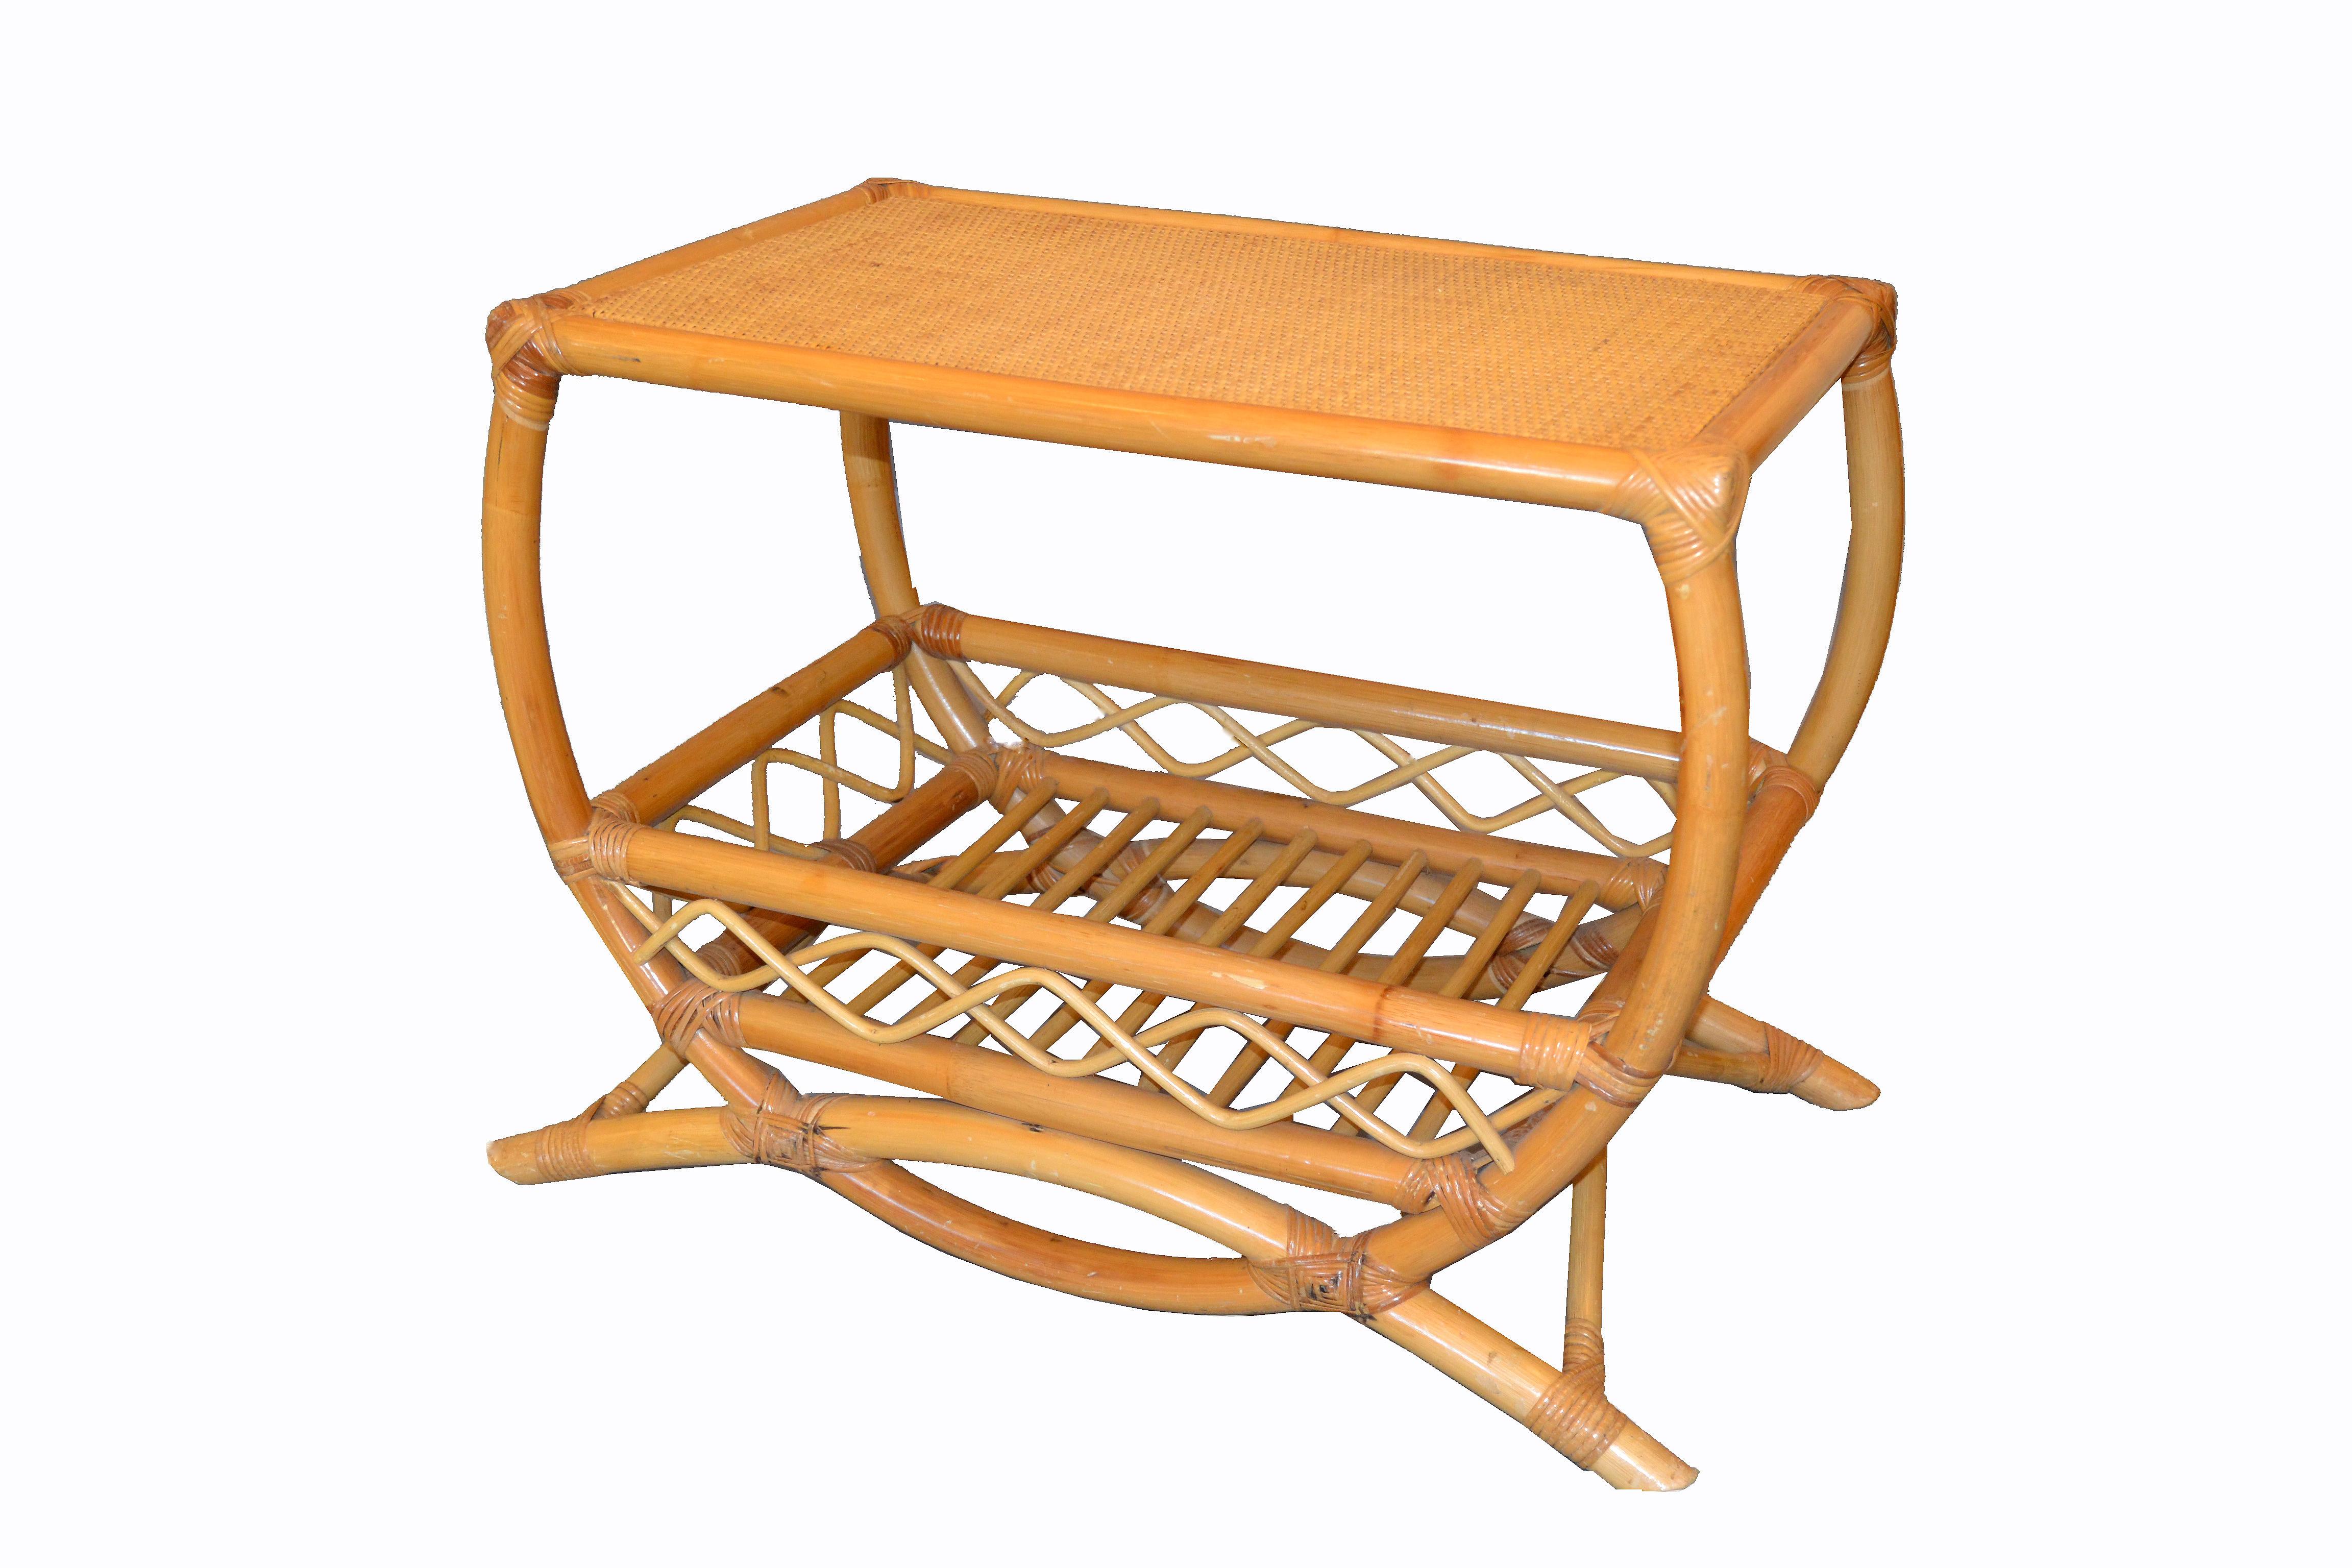 Vintage bamboo and rattan rectangular side table with a woven top, natural rattan frame, reed wrapped corners and lattice and bentwood design. Both ends are open.
Thick rattan dowels line the lower interior for additional storage space.
 